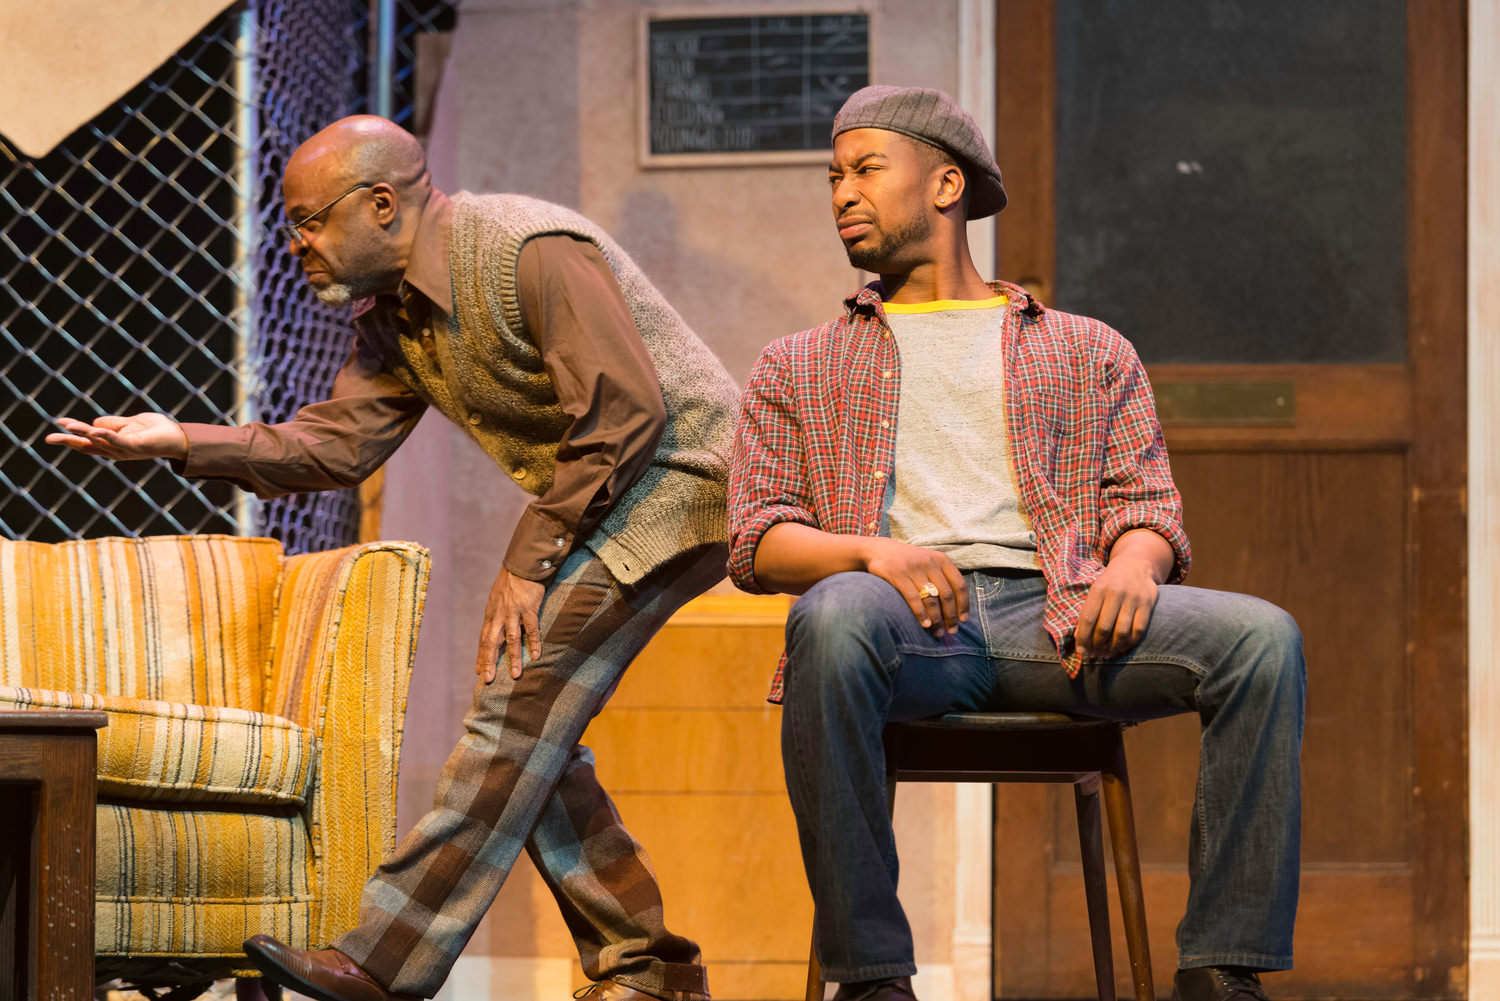 ShawnJ West (Turnbo) and Edward Neville Ewell (Youngblood) in African-American Shakespeare Company’s production of August Wilson’s ‘Jitney’, directed by L. Peter Callender; photo credit: Lance Huntley